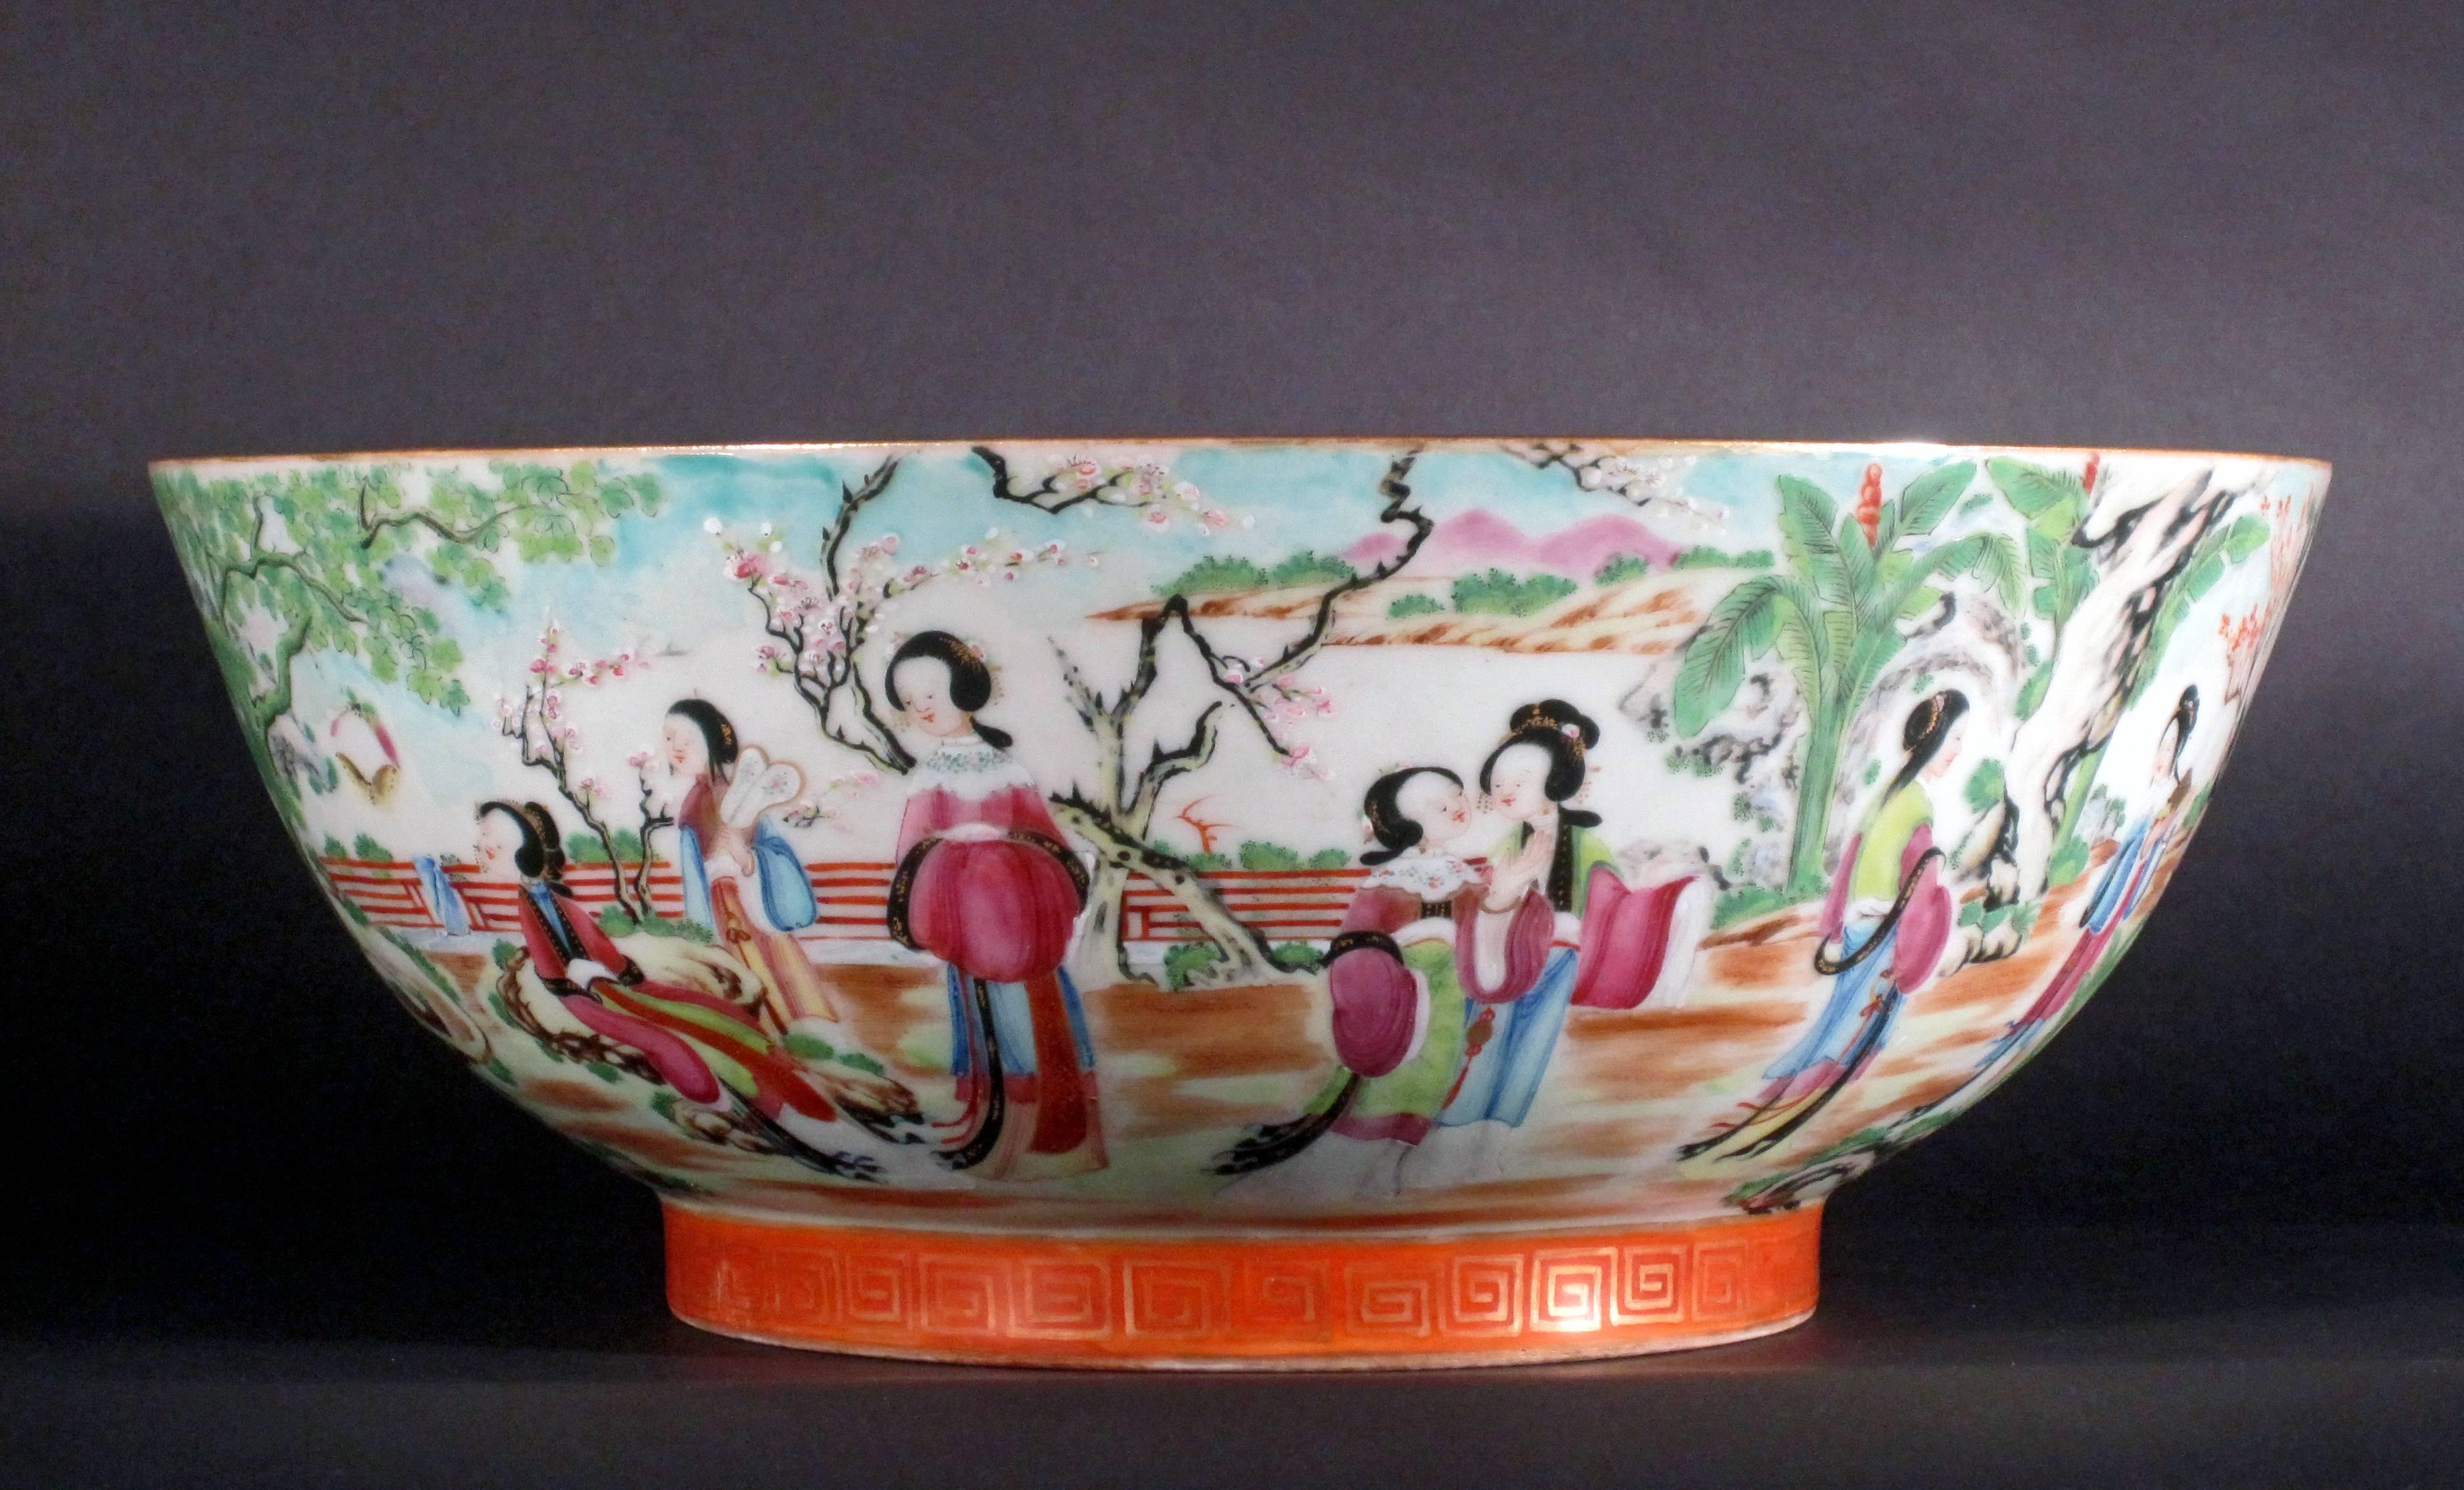 Chinese Porcelain famille rose bowl finely enameled with views of court figures promenading on terraces or acrobats performing for an Emperor, he is seated before a grisaille painting of a dragon that reads "Longfei Fengwu" with a cyclical